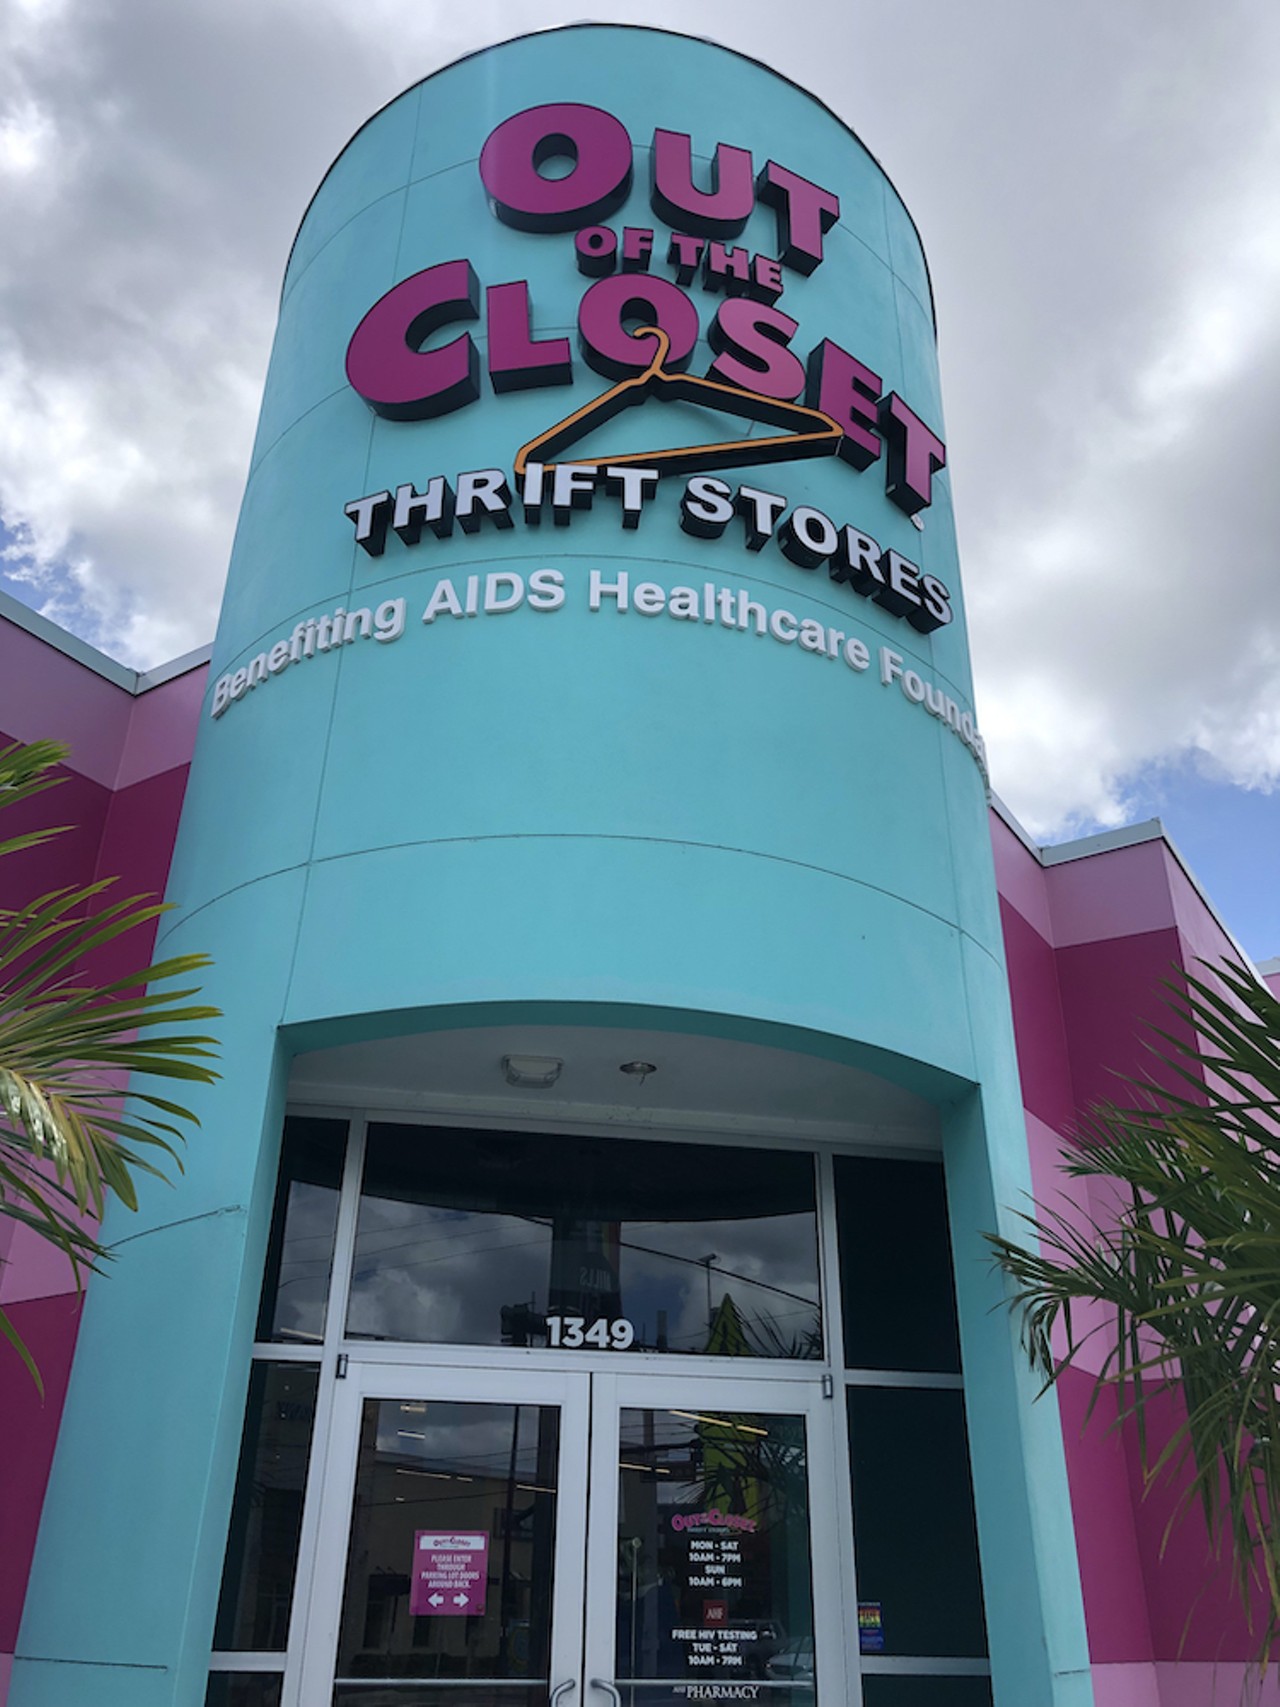 Out of the Closet
1349 N. Mills Ave., Orlando
This nonprofit thrift store is just one in a chain of stores that benefit AIDS Healthcare Foundation. Shoppers can browse the brightly colored store for funky second-hand pieces and take advantage of the store's free HIV testing.